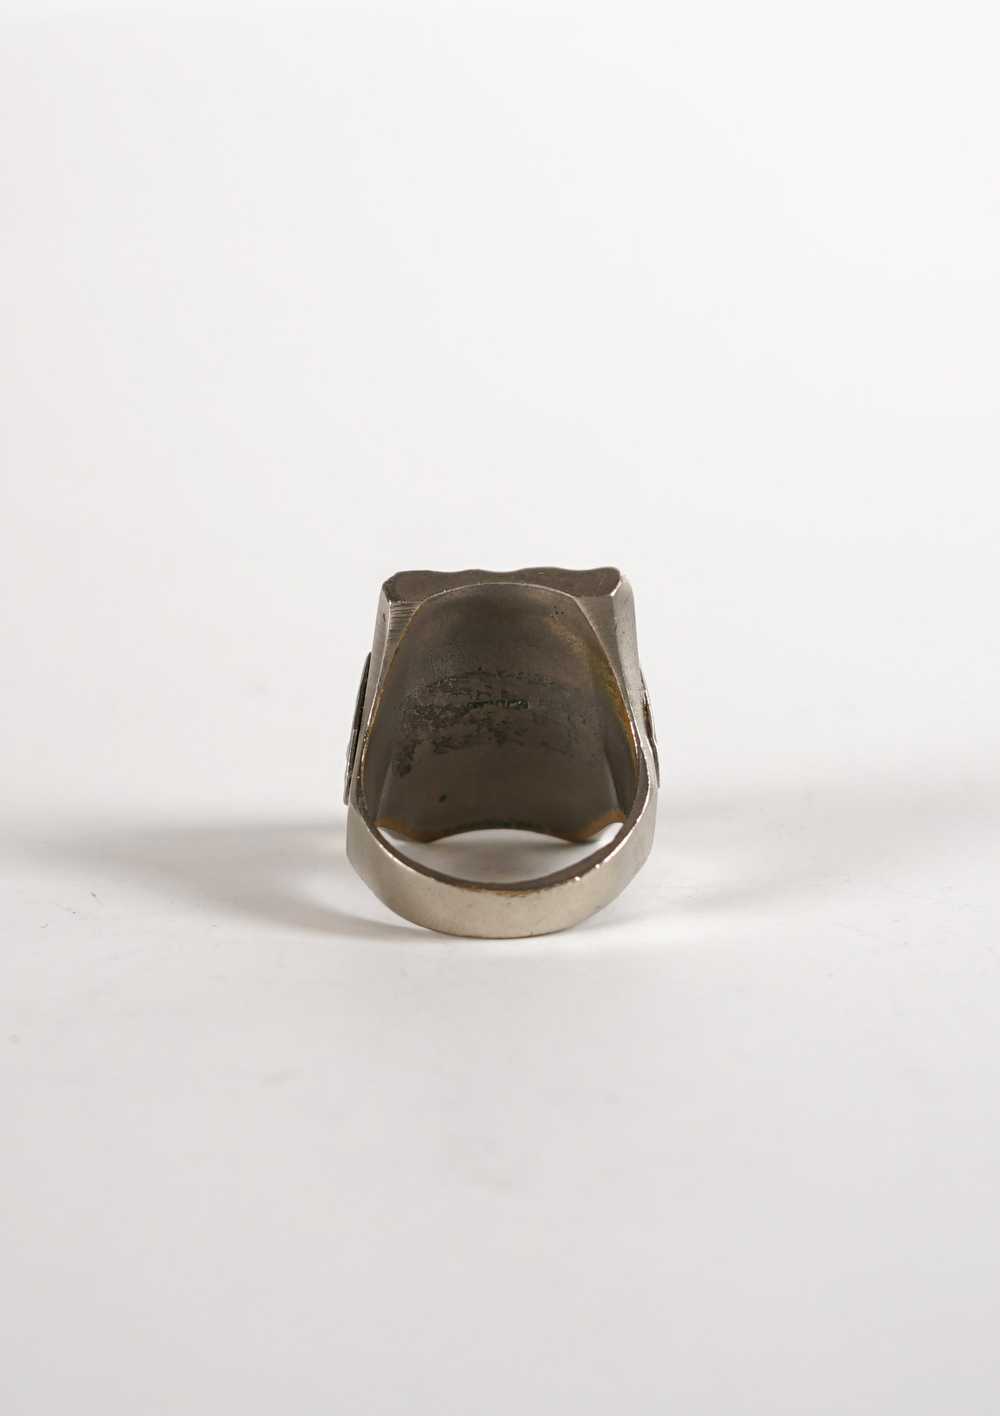 Mexican Biker Ring / Indian - image 4